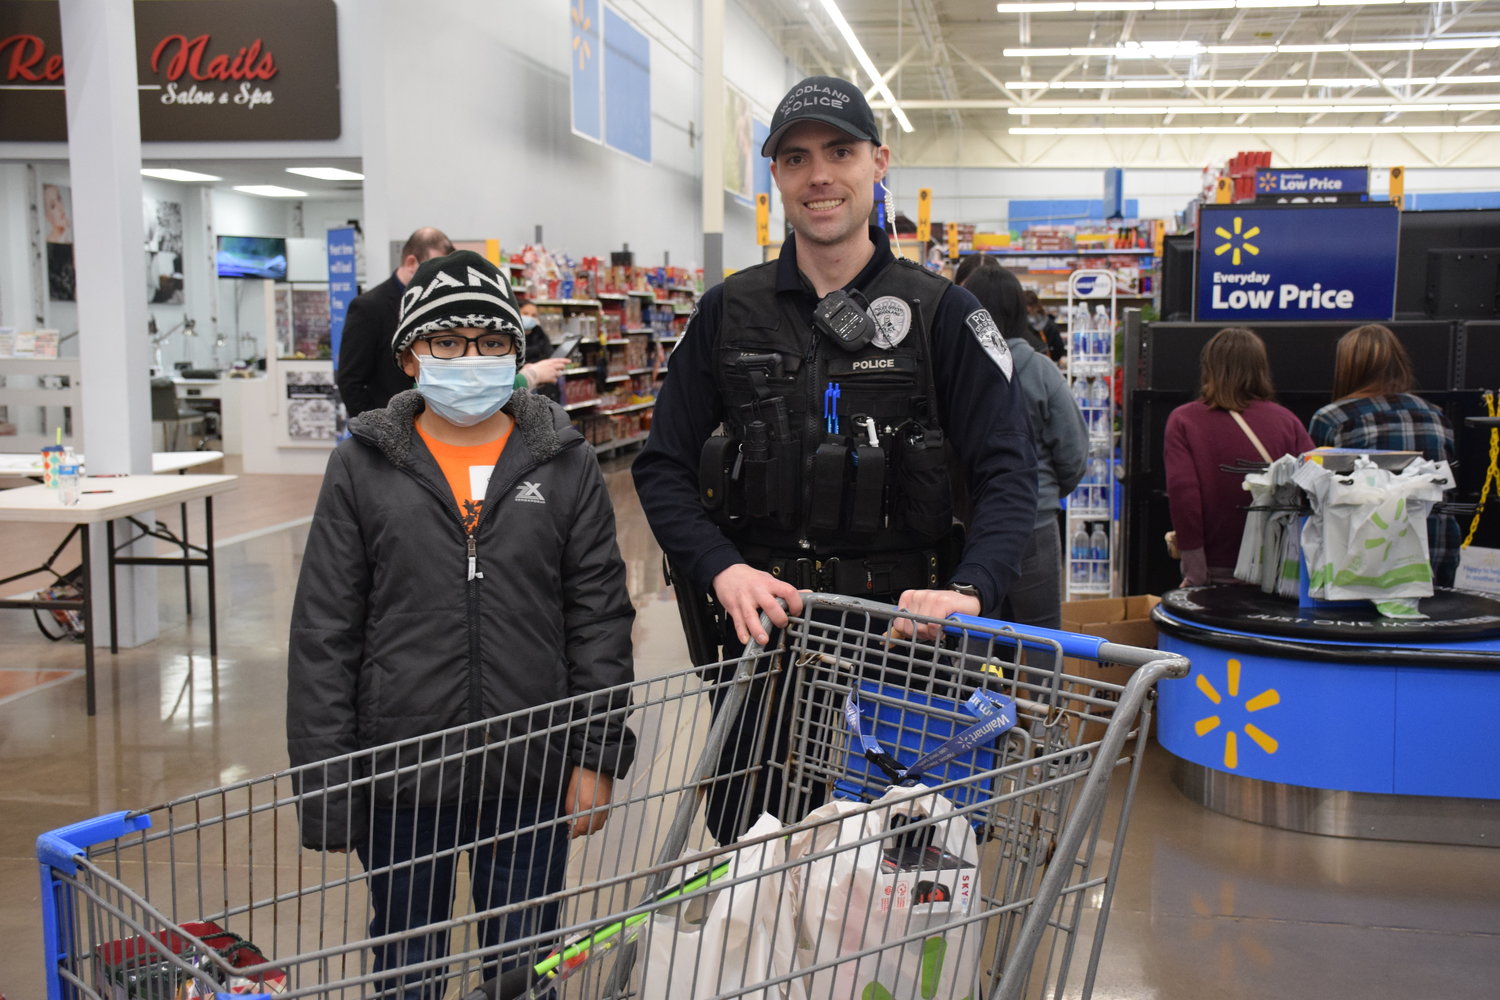 Osmar Gomez, left, stands by Woodland Police Department officer David Kerney after a successful haul from the Shop With a Cop event at the Woodland Walmart on Dec. 11.